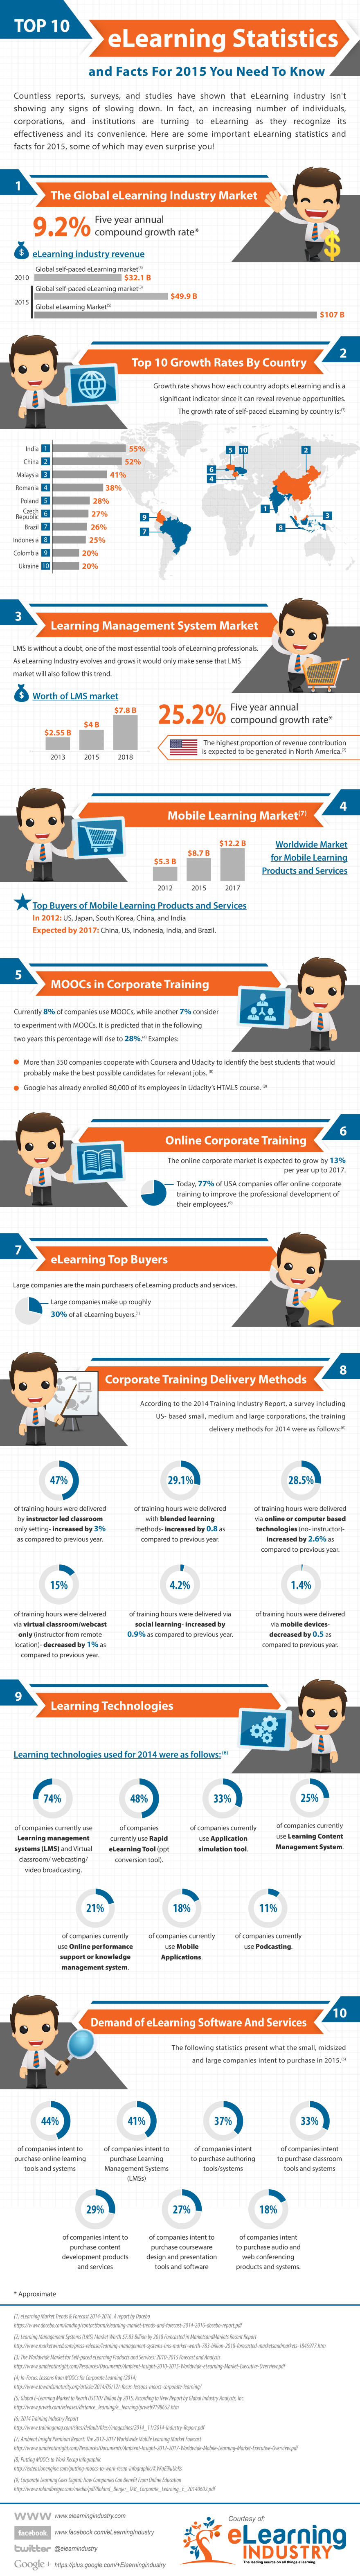 The Top eLearning Stats and Facts For 2015 Infographic